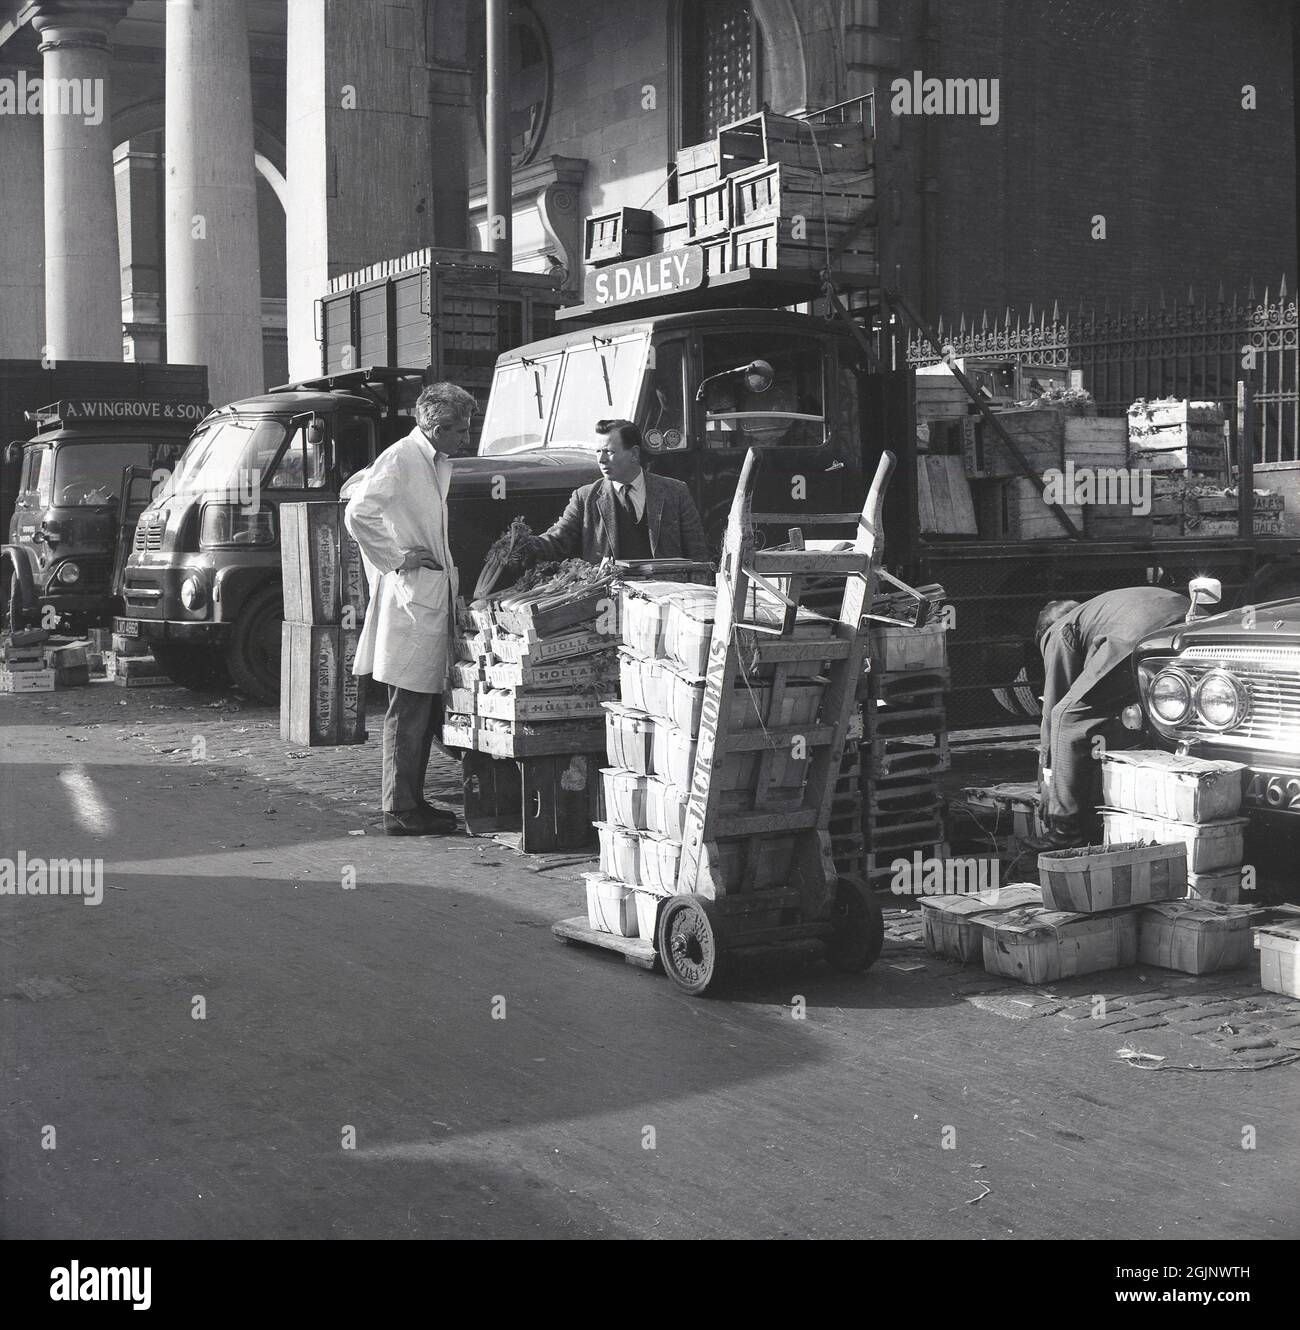 1950s, historical, in the delivery area of the old Covent Garden fruit, vegetable and flower market, in central London, England, UK, a market trader talking to a porter, as crates of vegetables, including celery from Holland, are being unloaded from a truck at the market pitch of S. Daley. The size of the market was such that at its height, it would receive almost a third of all the fruit and vegetables imported into the country. Due to size in a small part of the city, in 1974 the market was relocated. Stock Photo